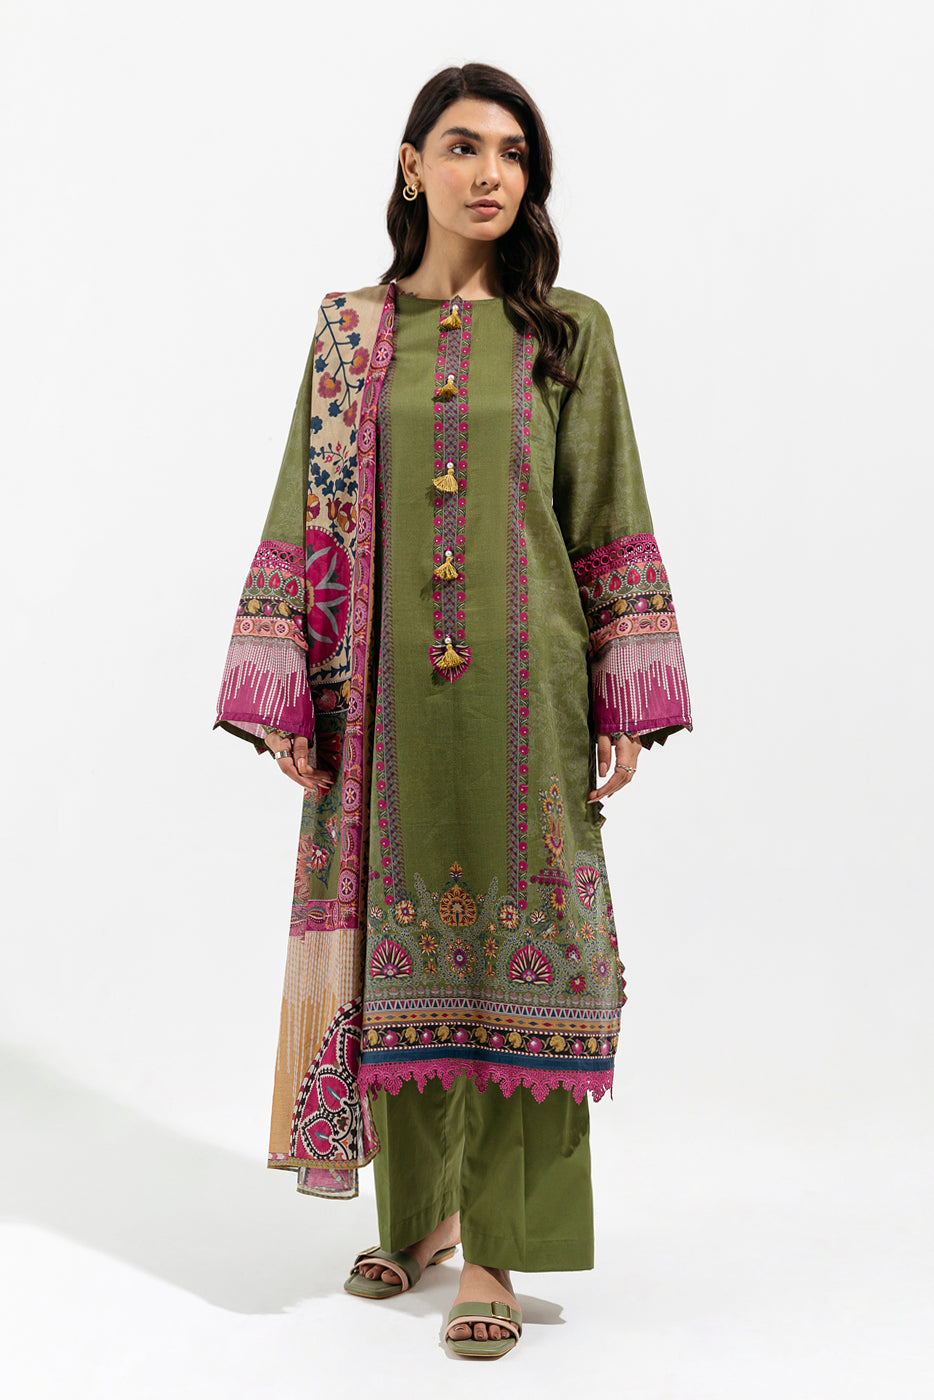 3 PIECE - PRINTED LAWN SUIT - OLIVE SUZANI